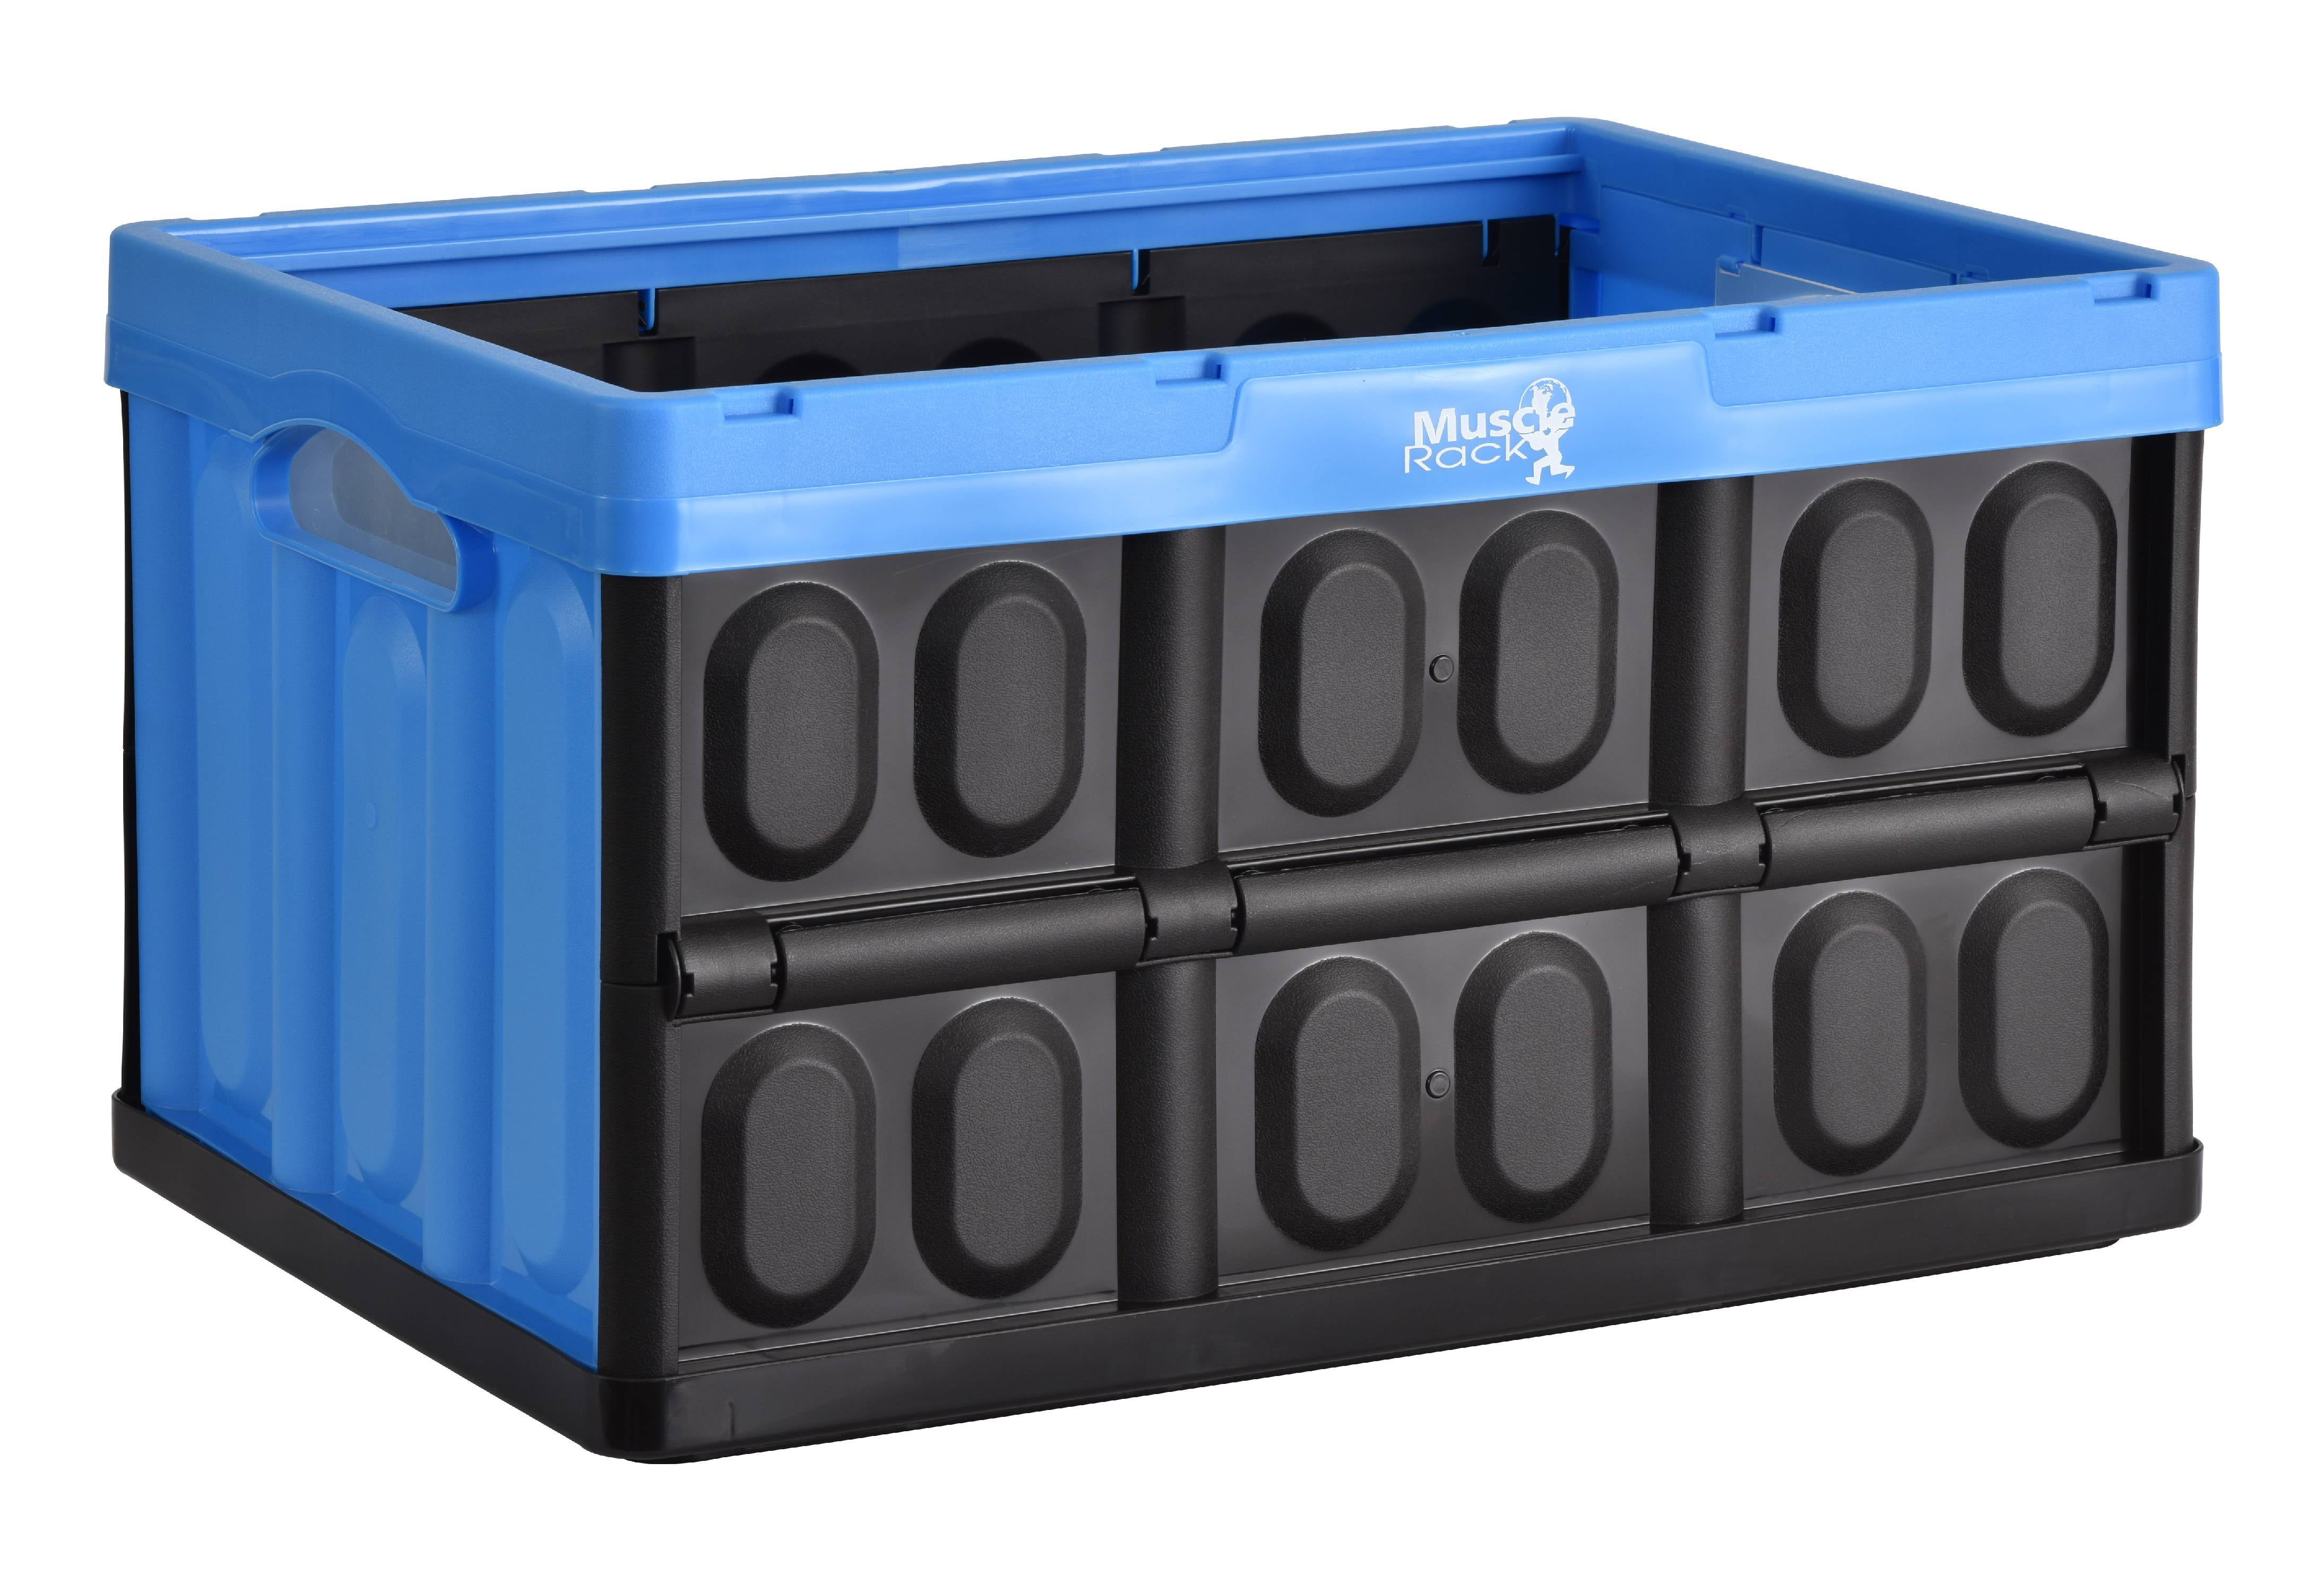 Optimal Products Strong Folding Collapsible Plastic Storage Crates Boxes Stackable Basket 32L PACK OF 1